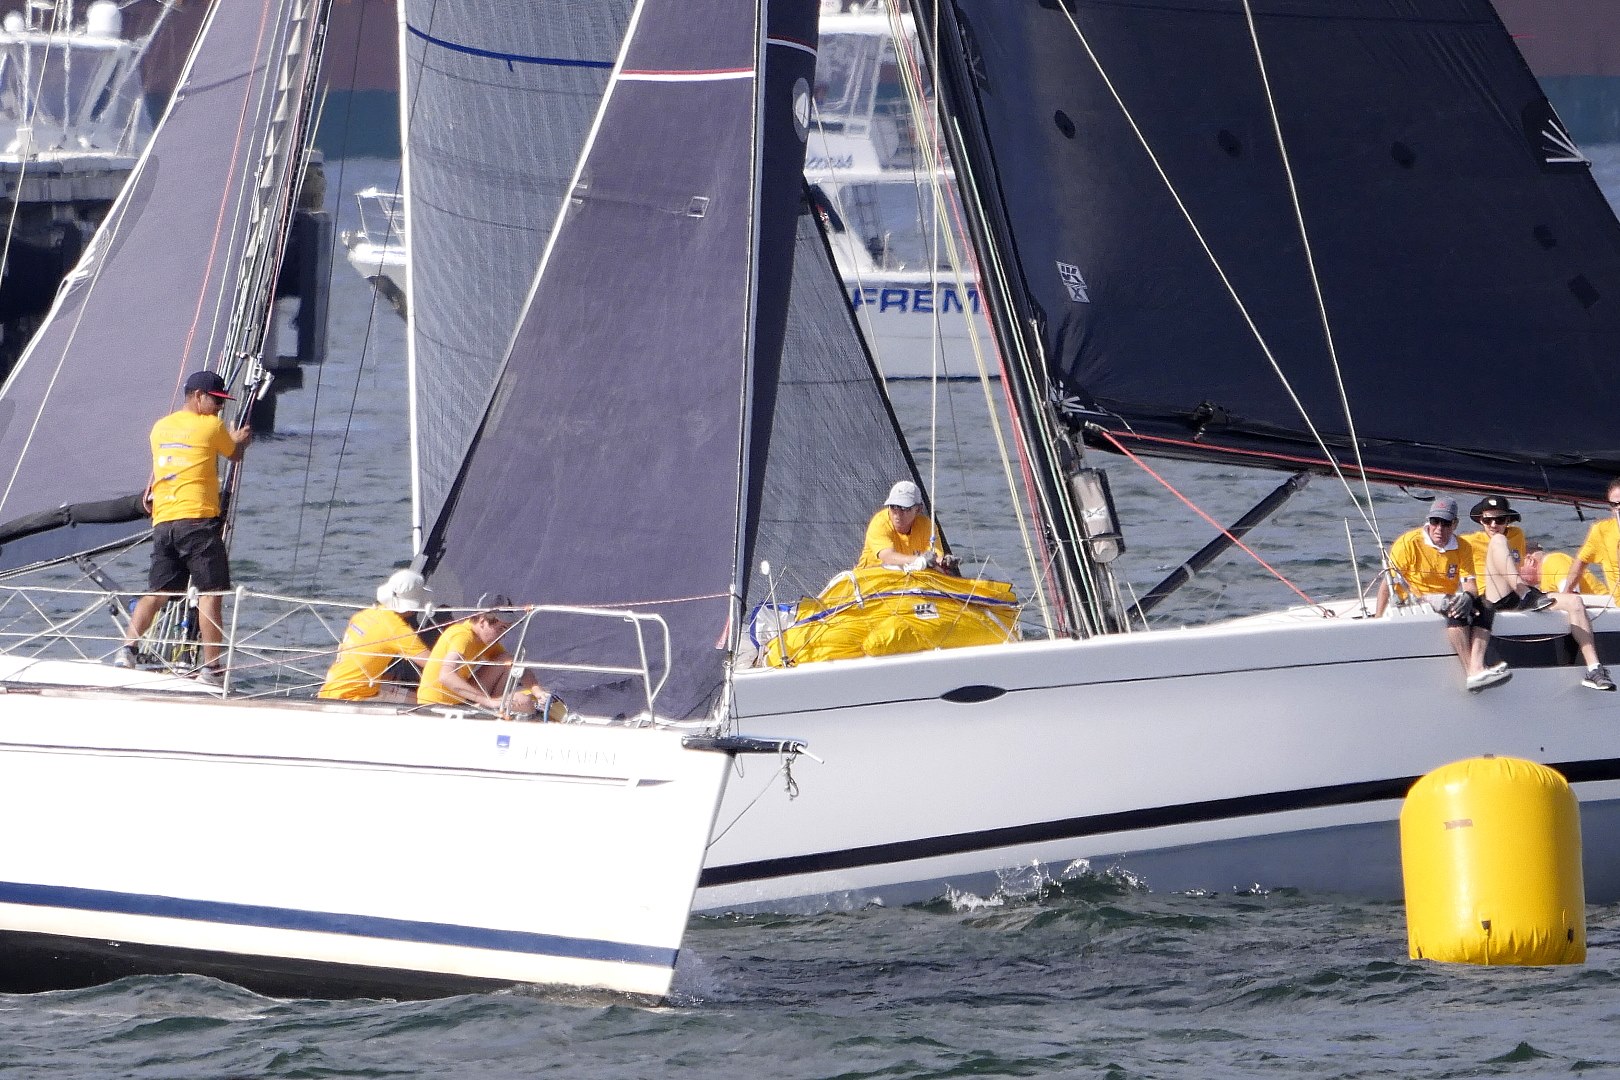 BETTER SAFE THAN SORRY WHEN RACING SAILBOATS